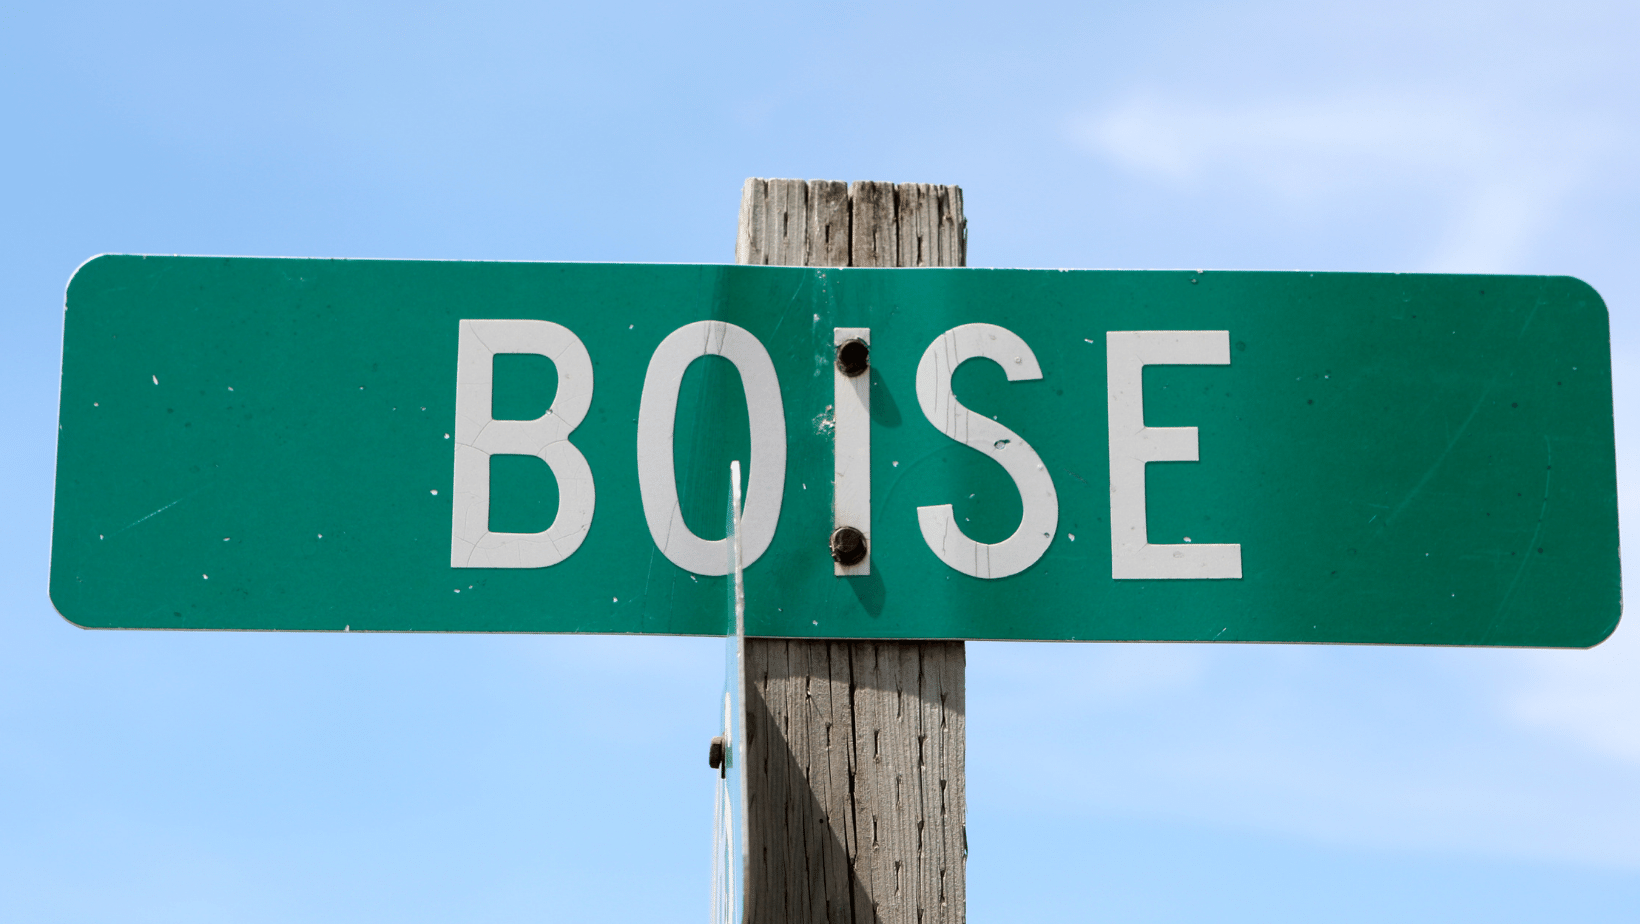 A street sign with the word "boise" on it.